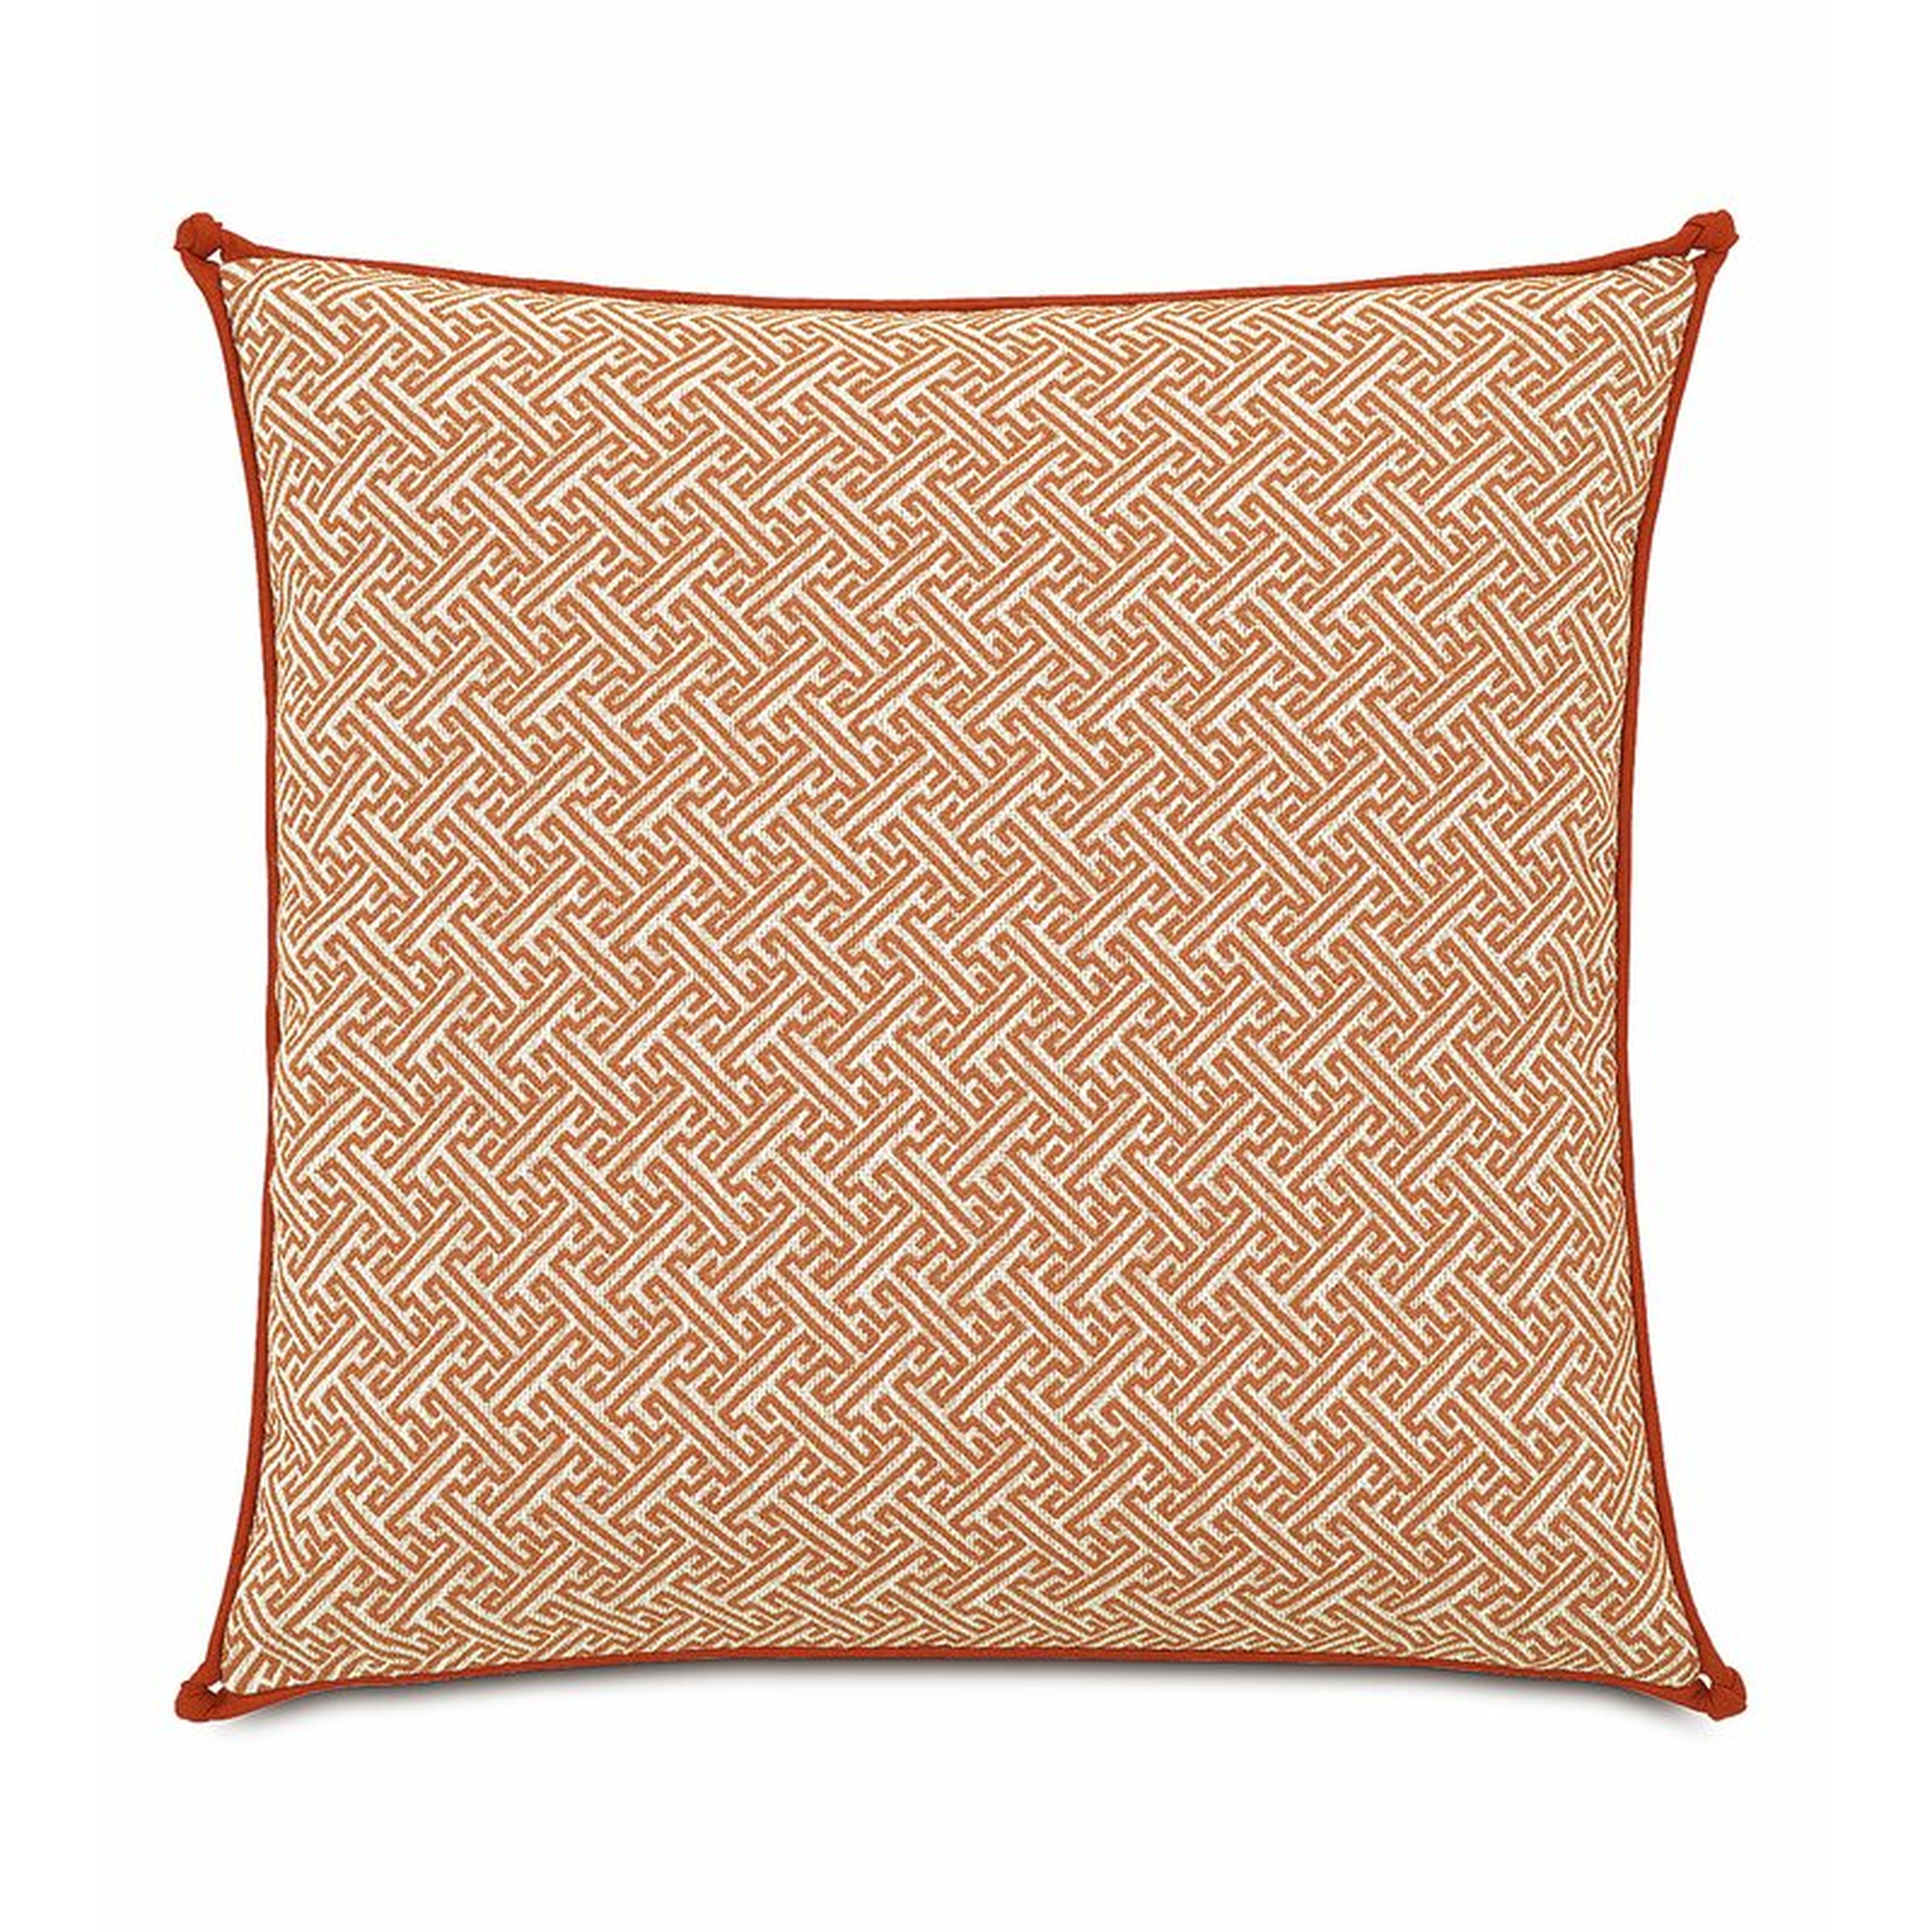 Eastern Accents Indira Ingalls Throw Pillow - Perigold